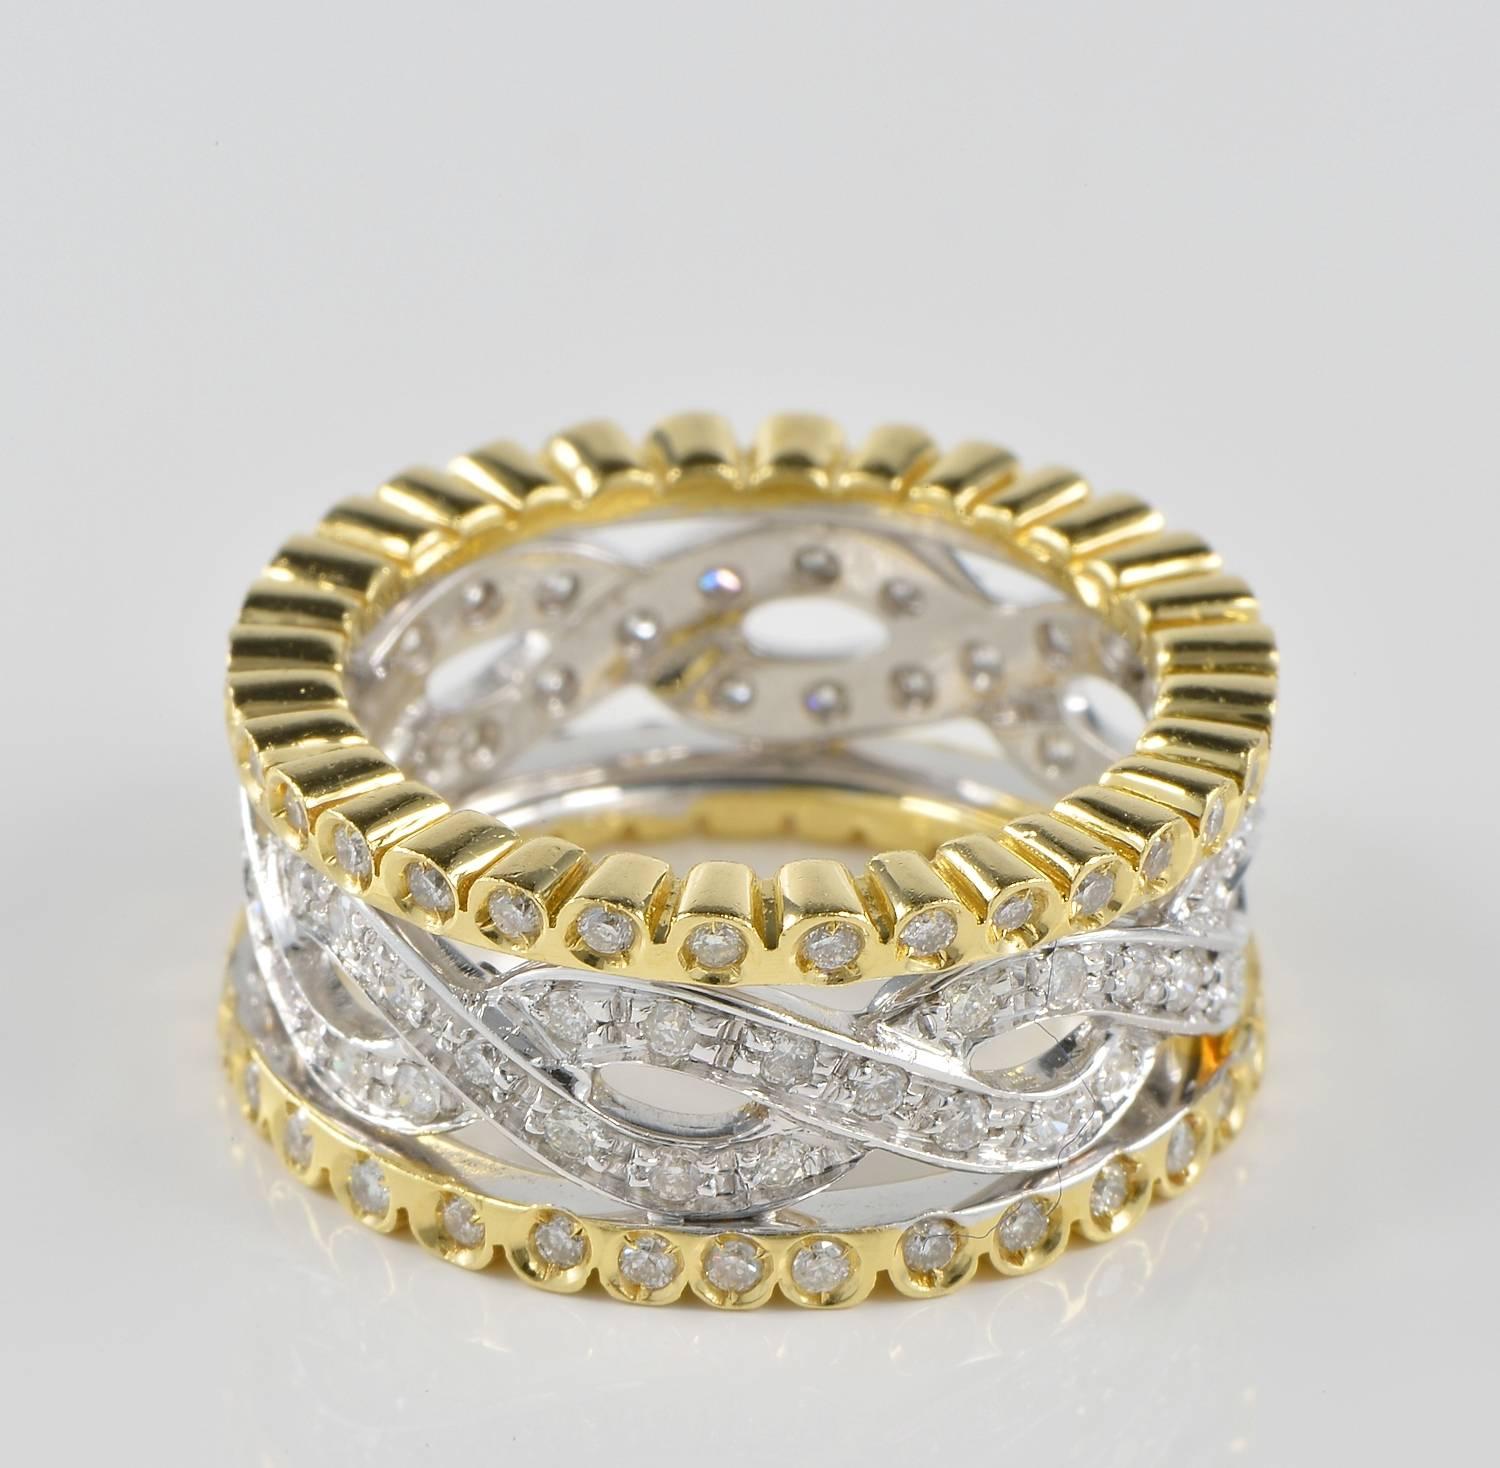 A substantially hand crafted of solid 18 Kt gold Italian origin eternity ring.
Wide, eye catching, distinctive and quite unique design symbolizing the eternity sign which stands as for ever.
Set with 132 brilliant cut Diamonds giving result and